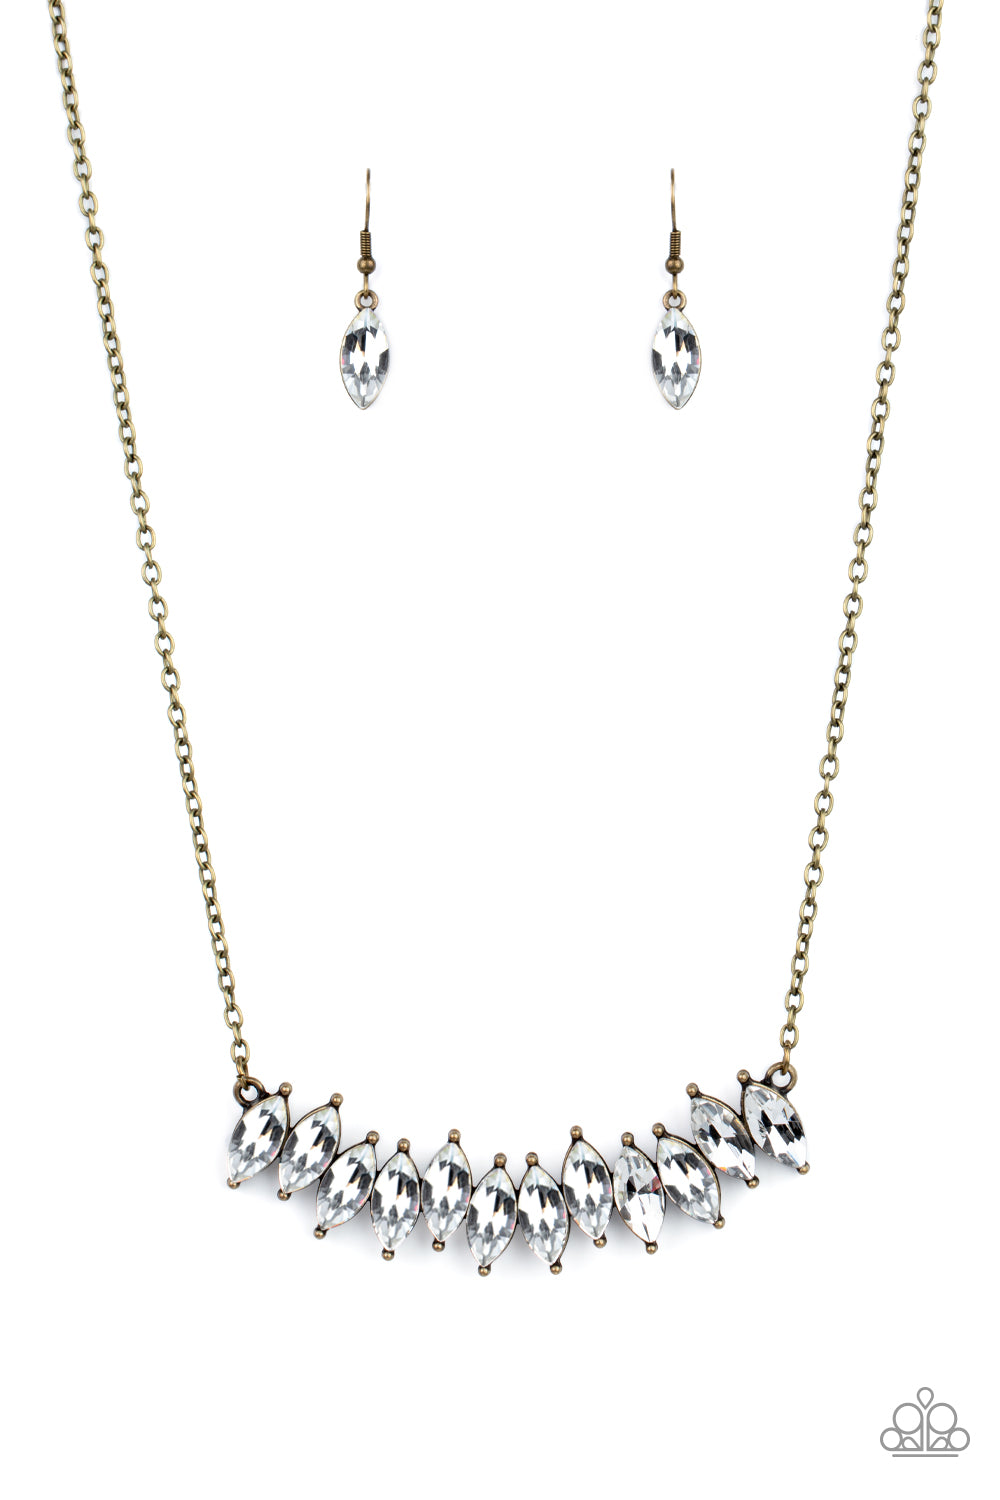 Icy Intensity - brass - Paparazzi necklace